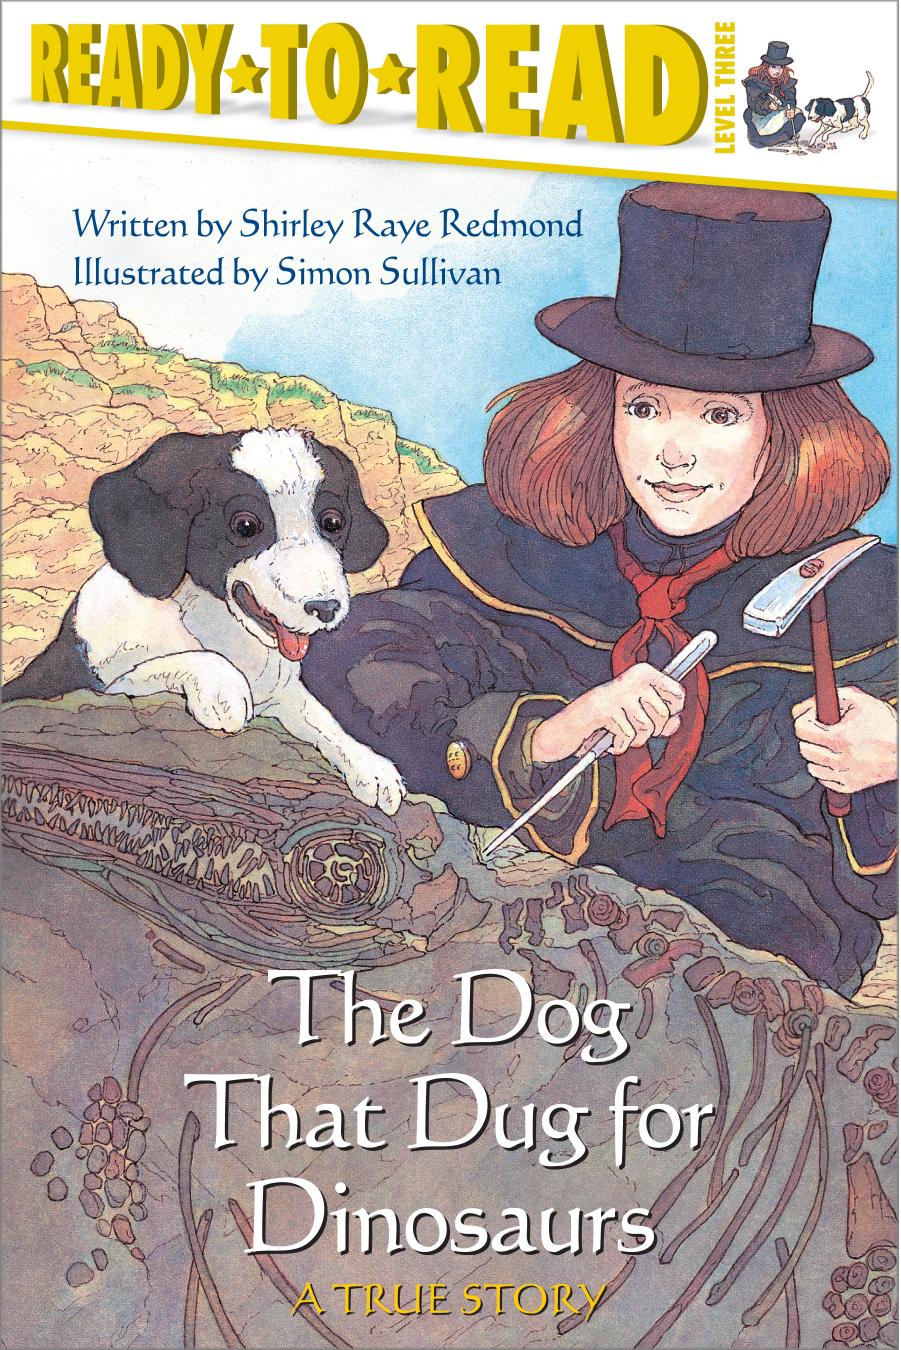 Ready-to-Read The Dog That Dug for Dinosaurs by written by Shirley Raye Redmond illustrated by Simon Sullivan